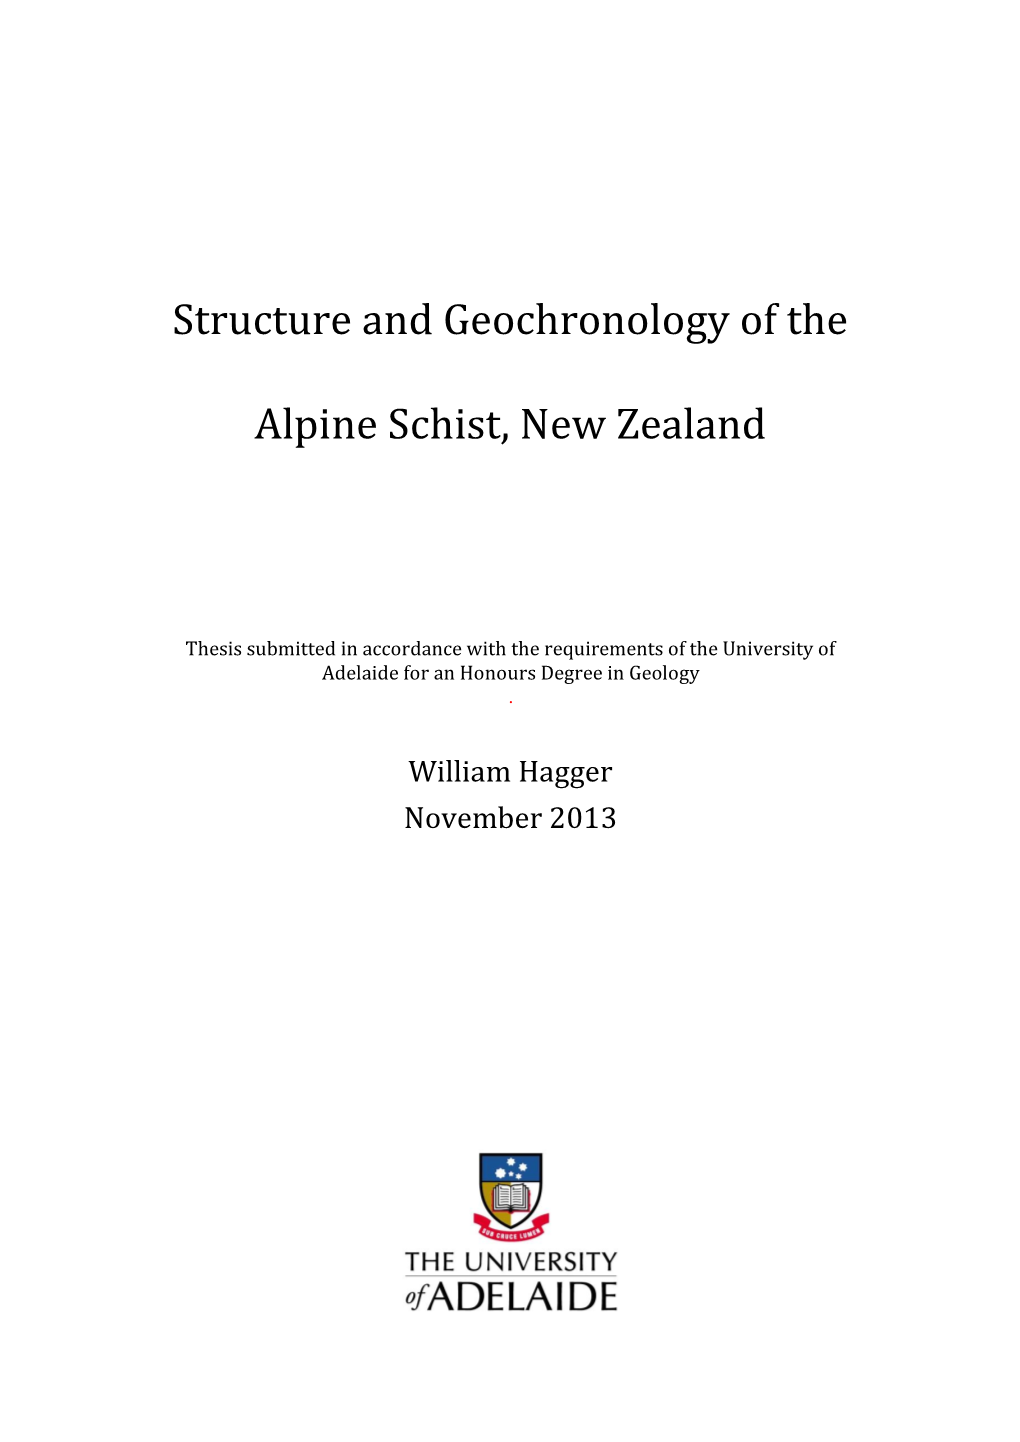 Structure and Geochronology of the Alpine Schist, New Zealand